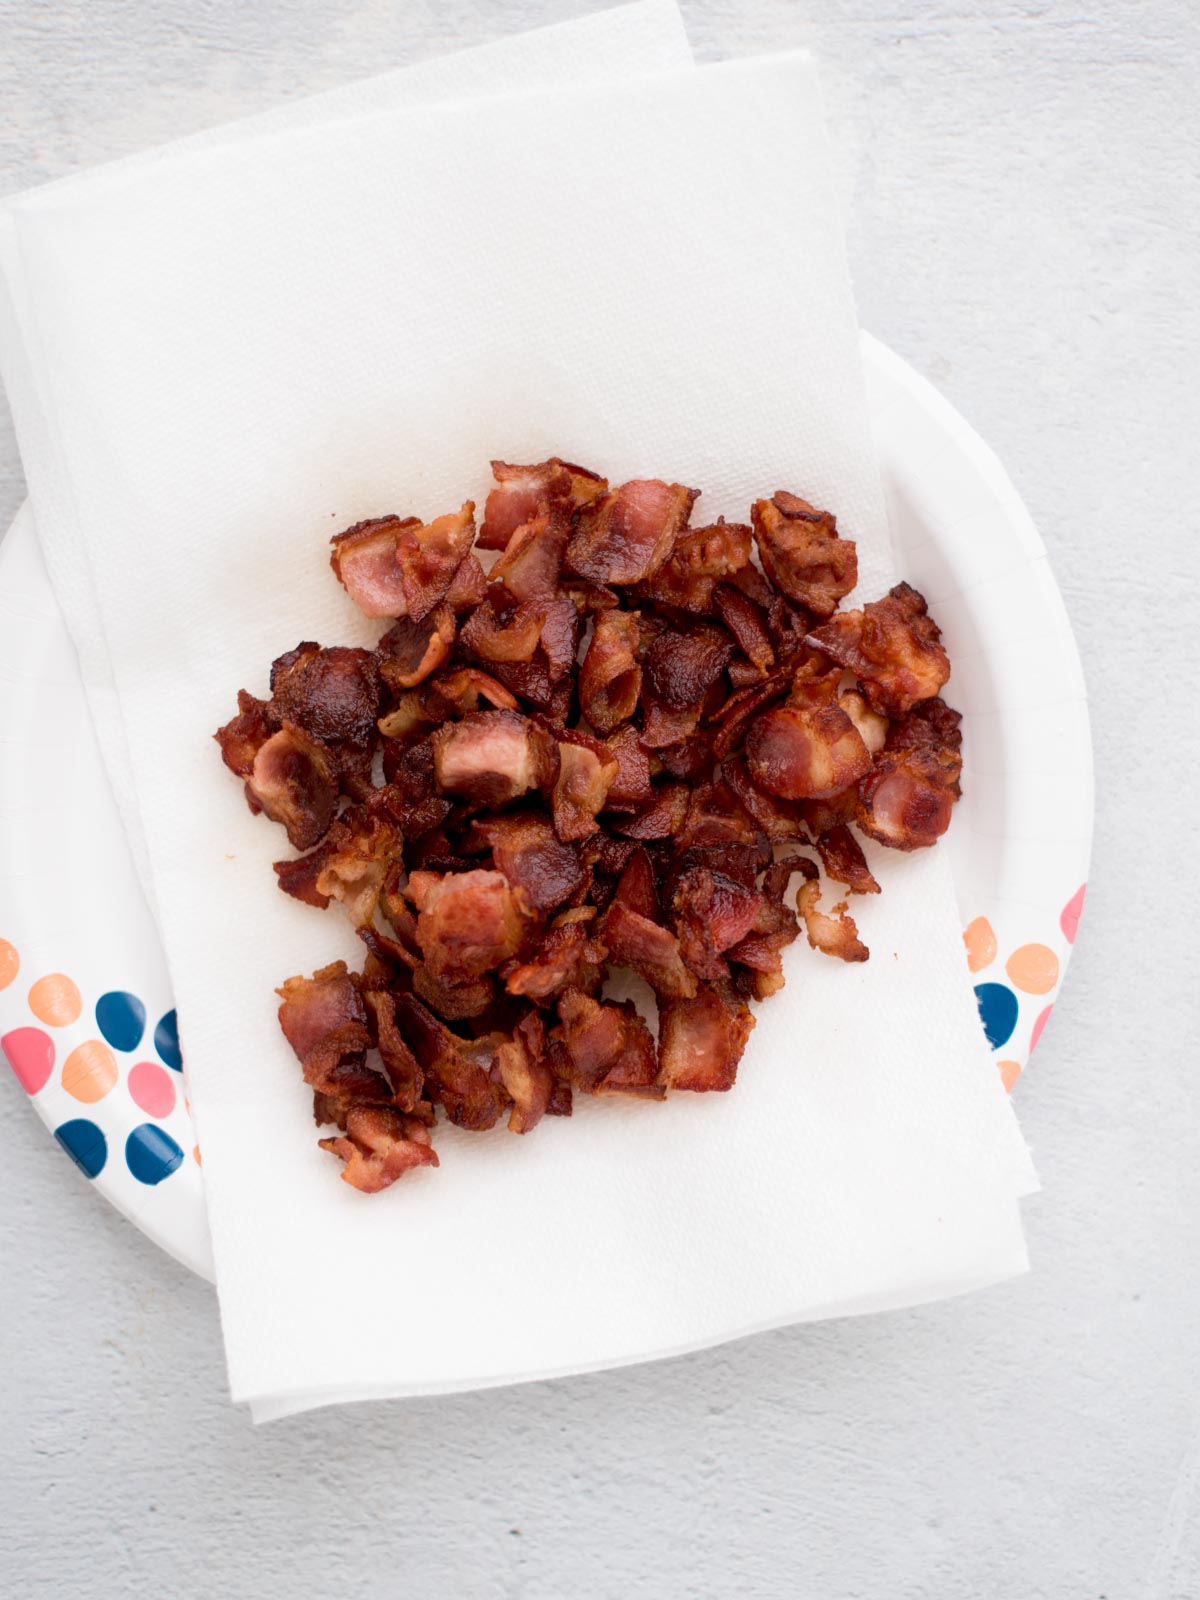 Crispy golden bacon pieces chopped laying on a paper towels covered plate.